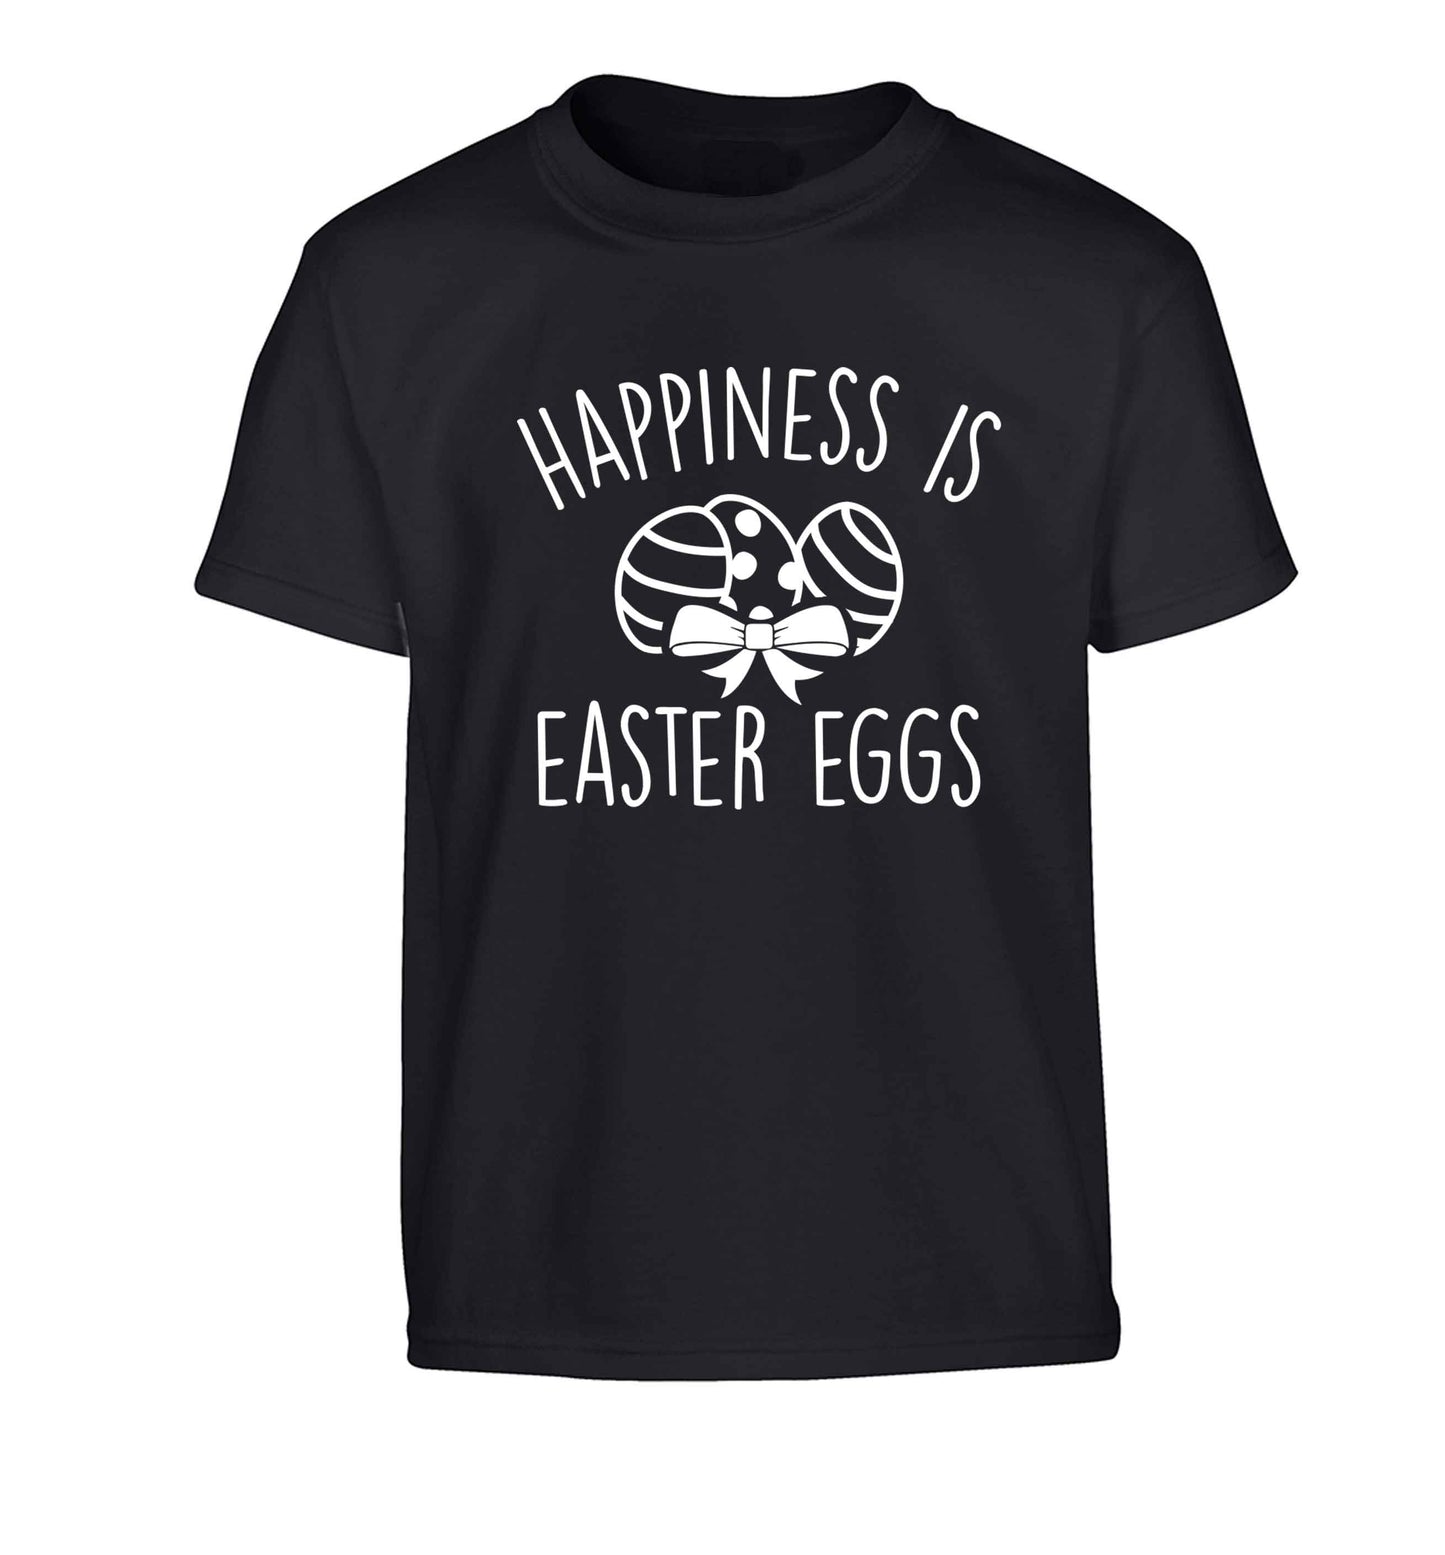 Happiness is Easter eggs Children's black Tshirt 12-13 Years